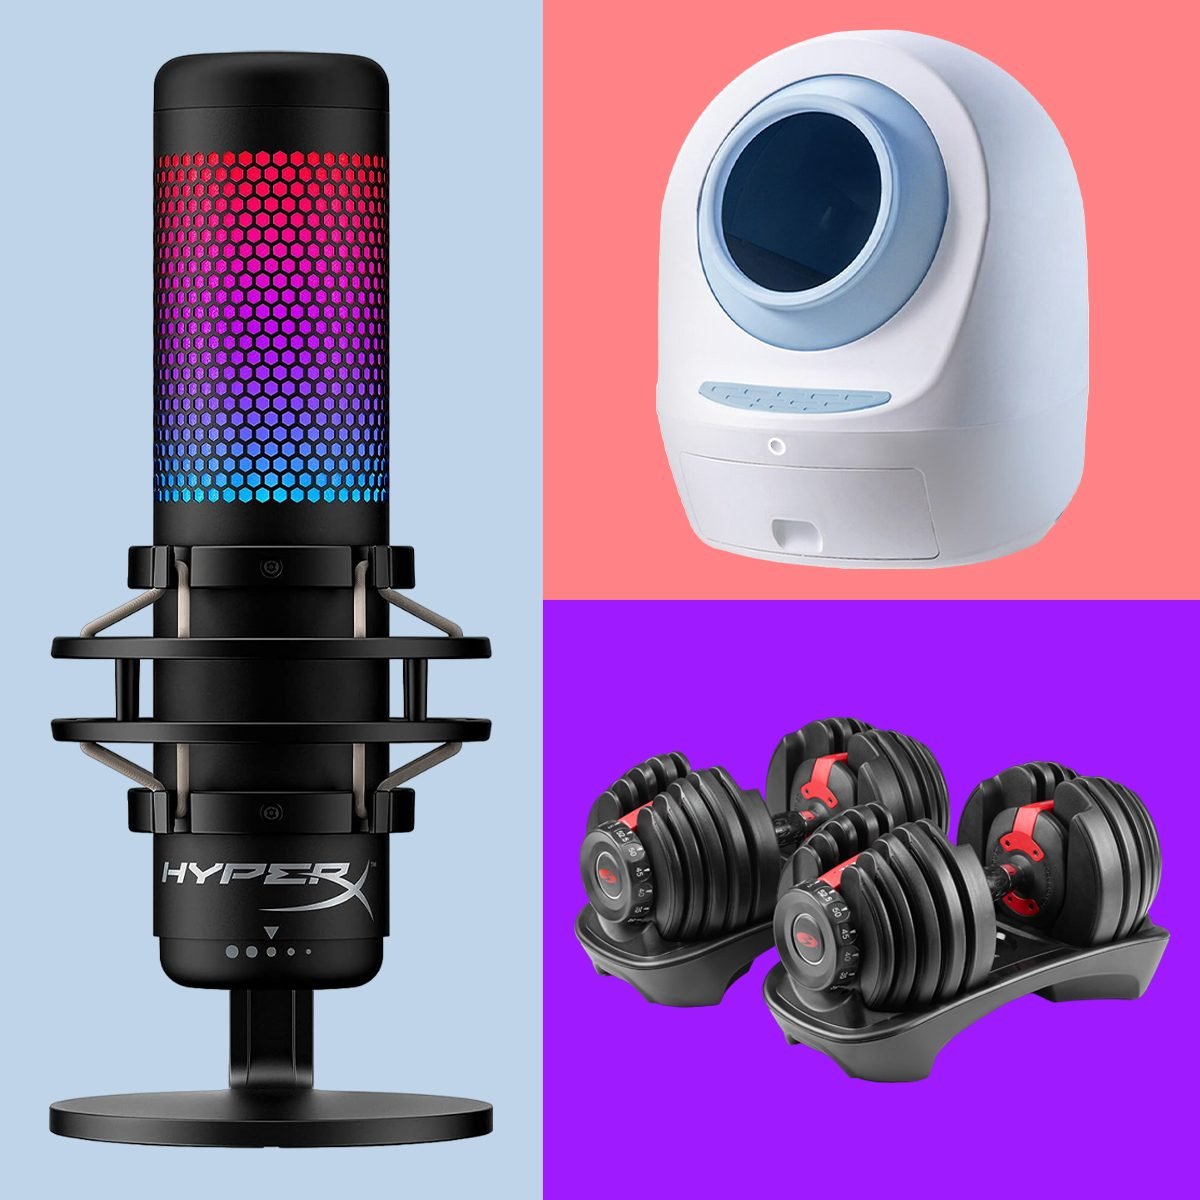 Cool Gadgets for Tech Lovers for Christmas 2024